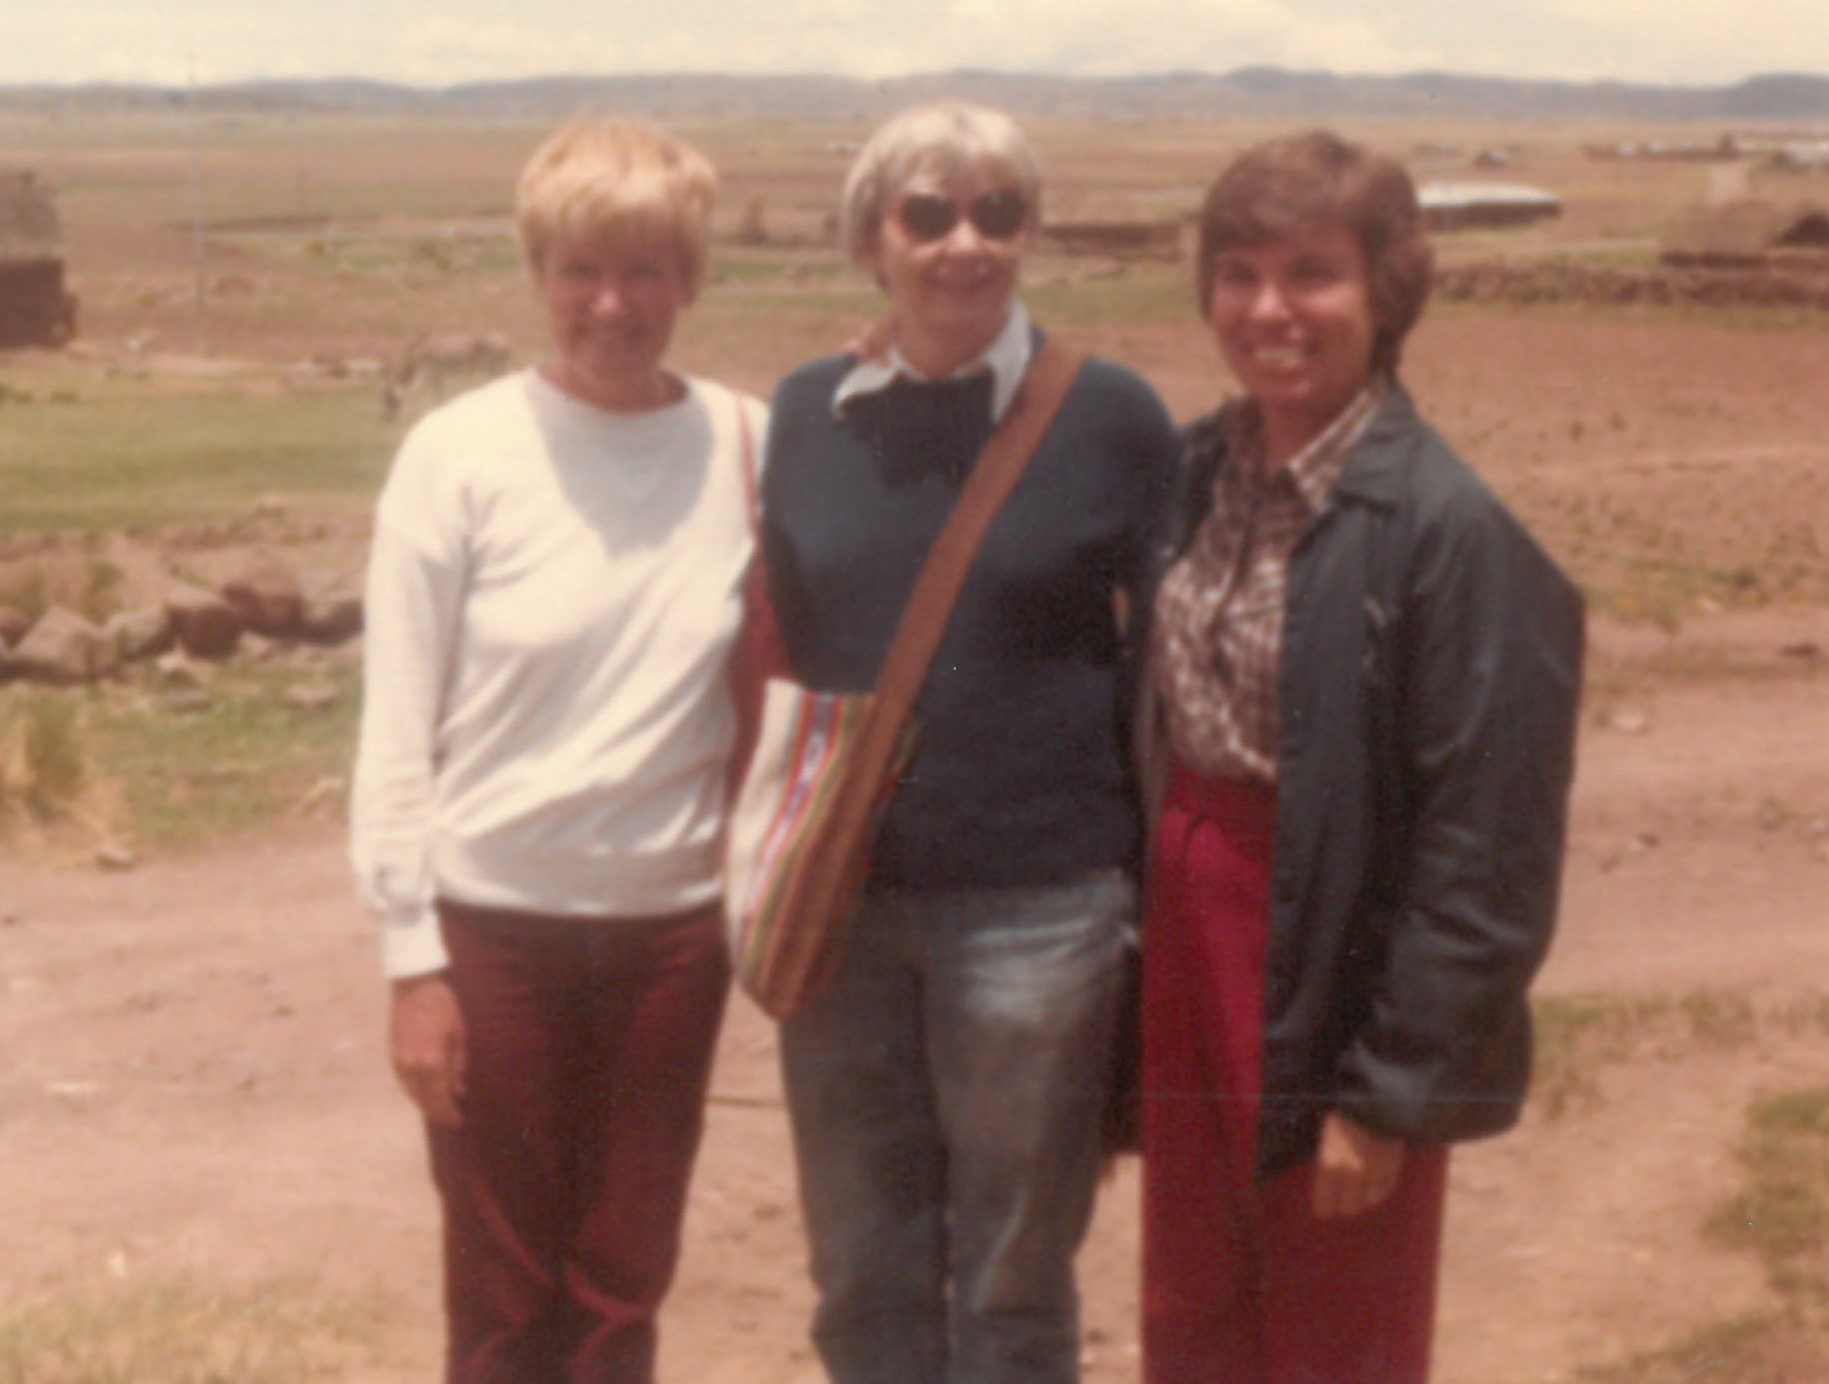 1979 – Missionaries to South America